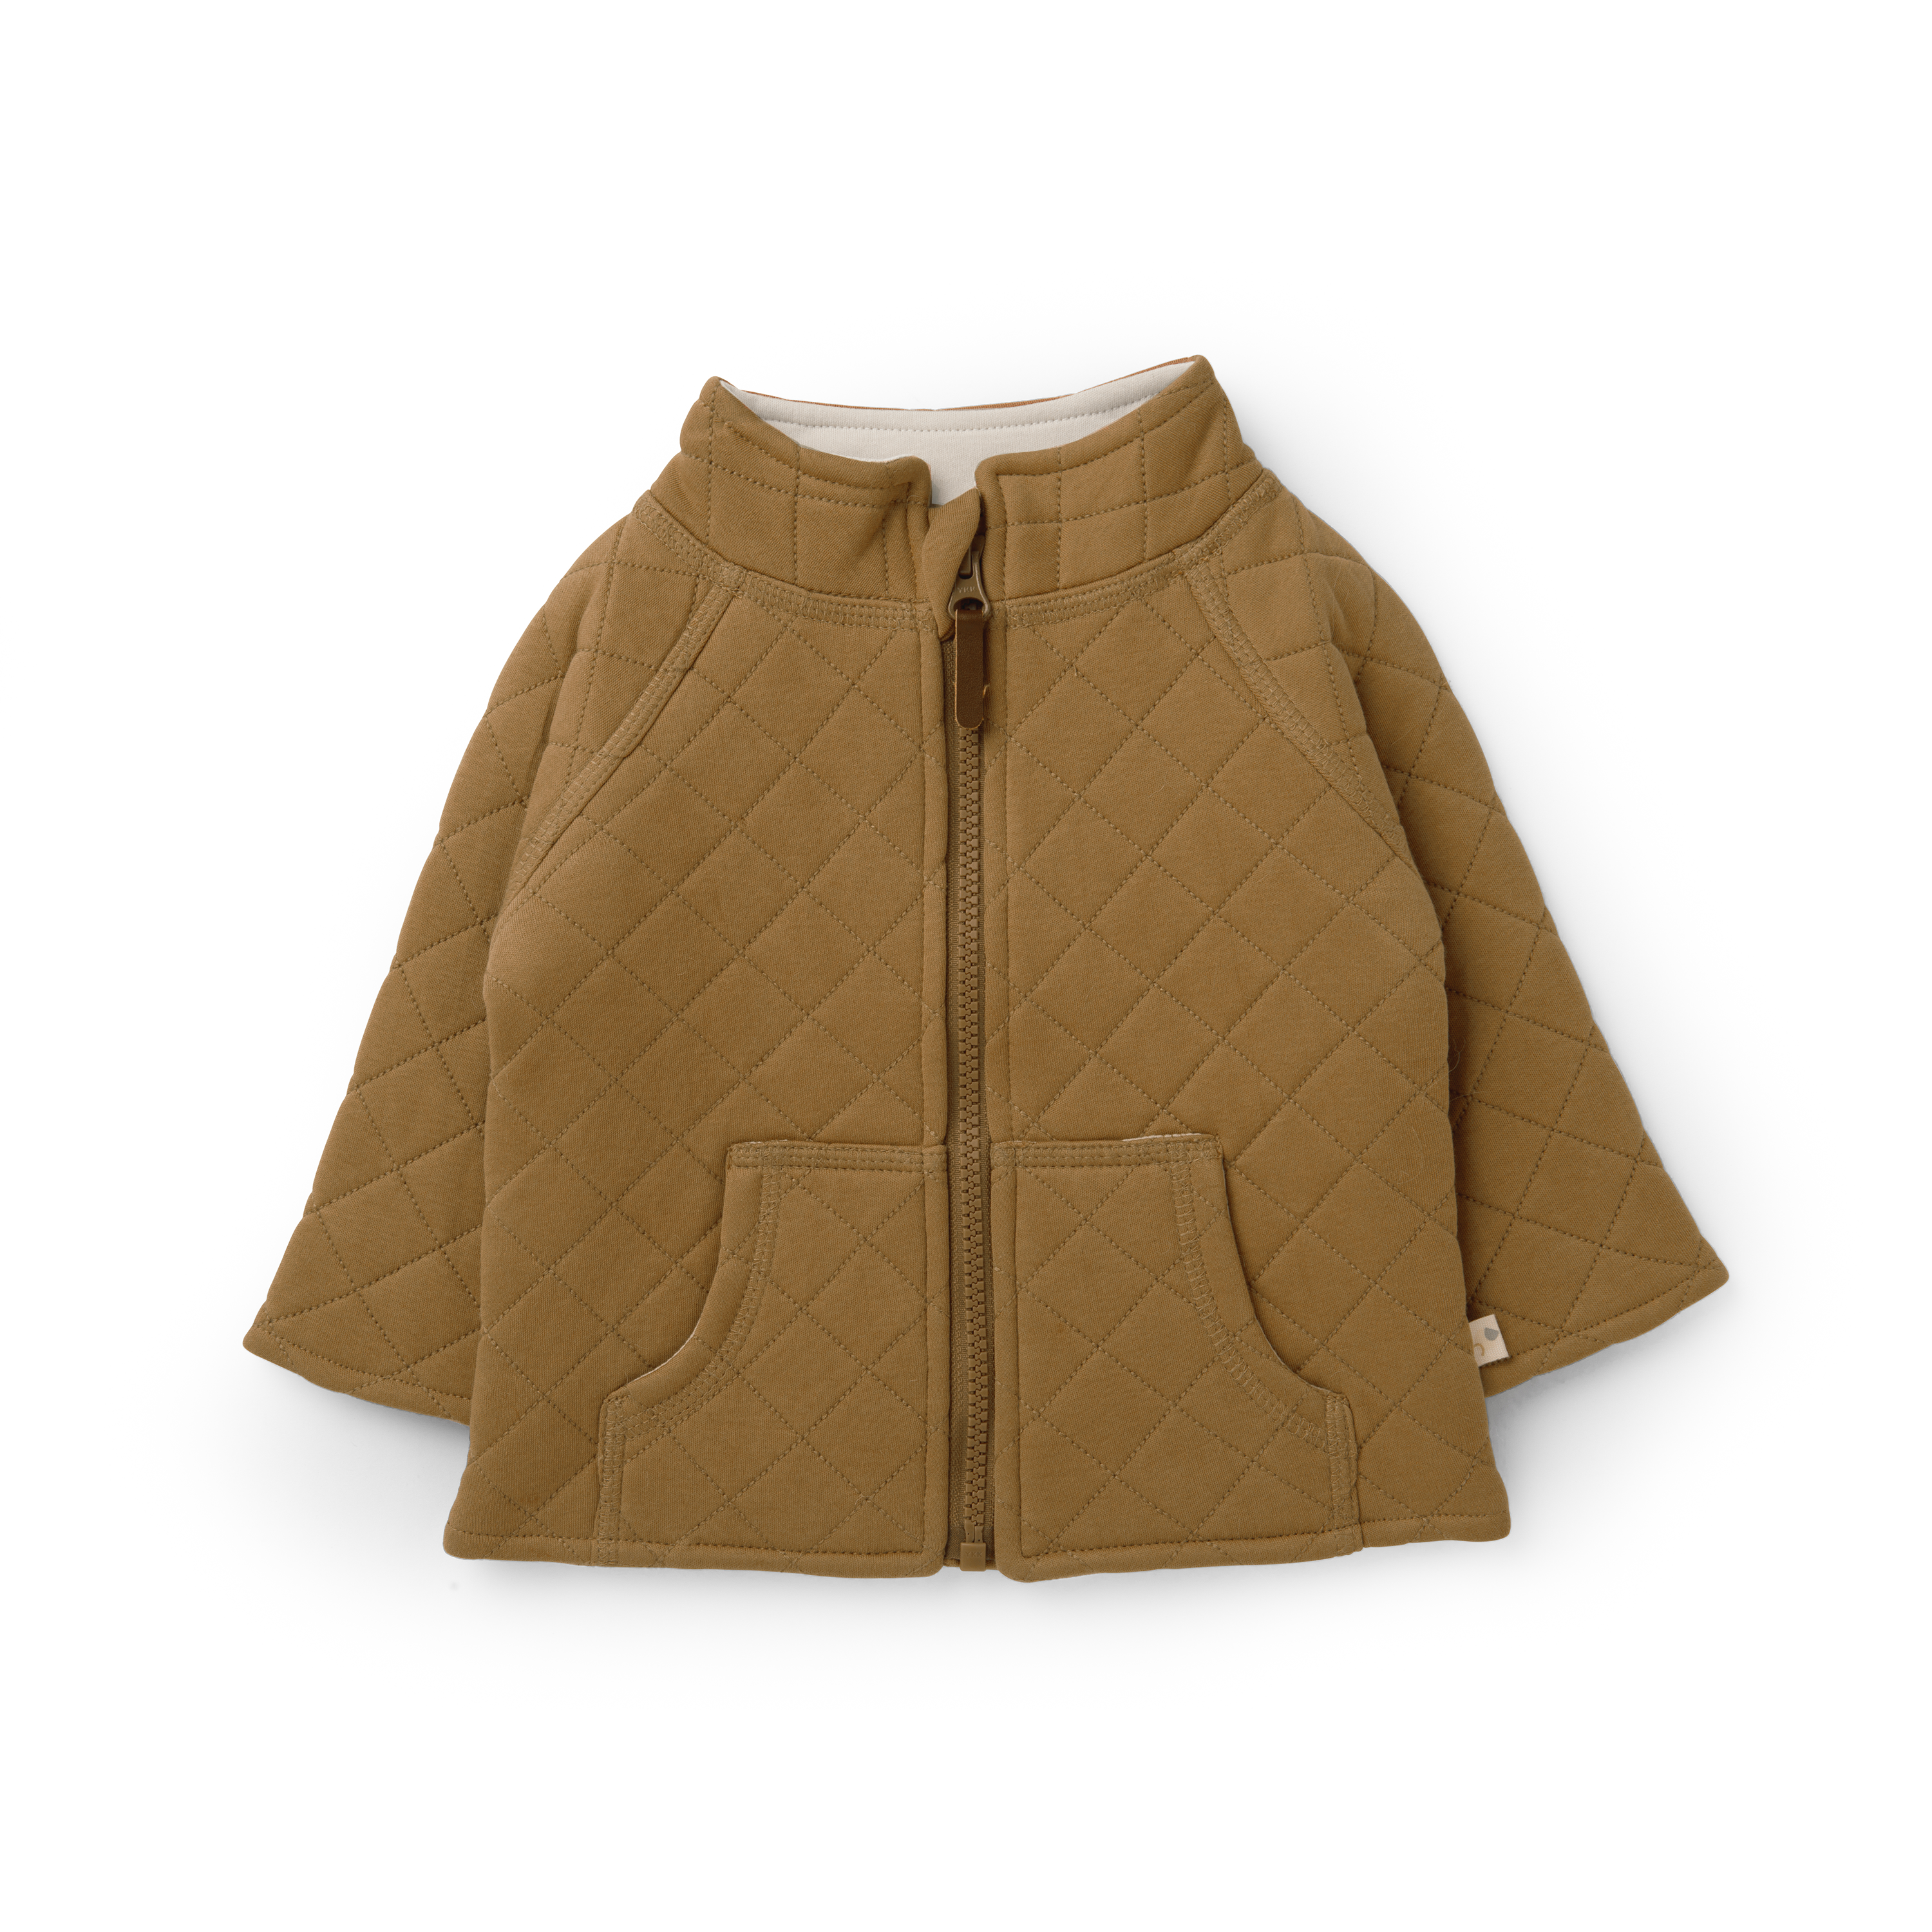 A tan Organic Merino Wool Zip Jacket from Organic Kids with a full-length zipper and two front pockets, displayed against a white background. The jacket has a rounded neck and appears lightweight.